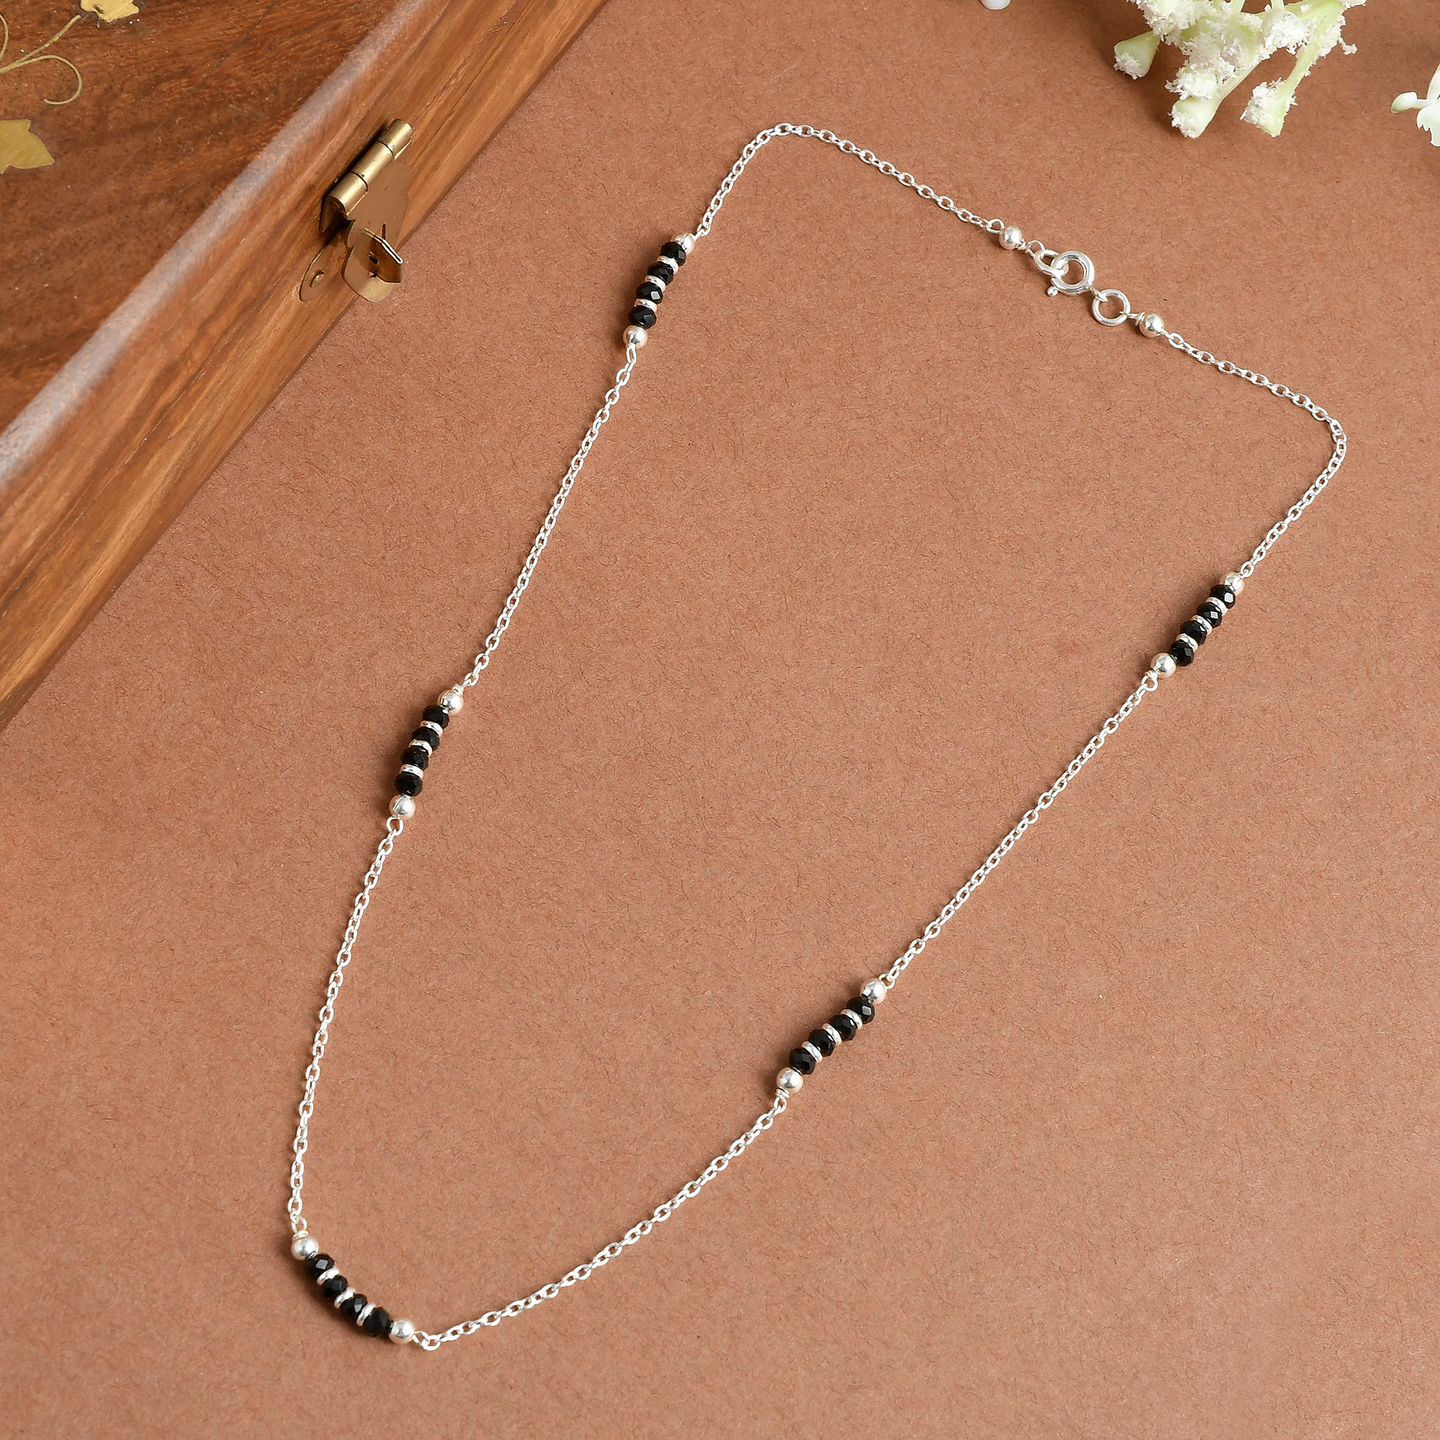 Silver 925 Chain with Black Beads